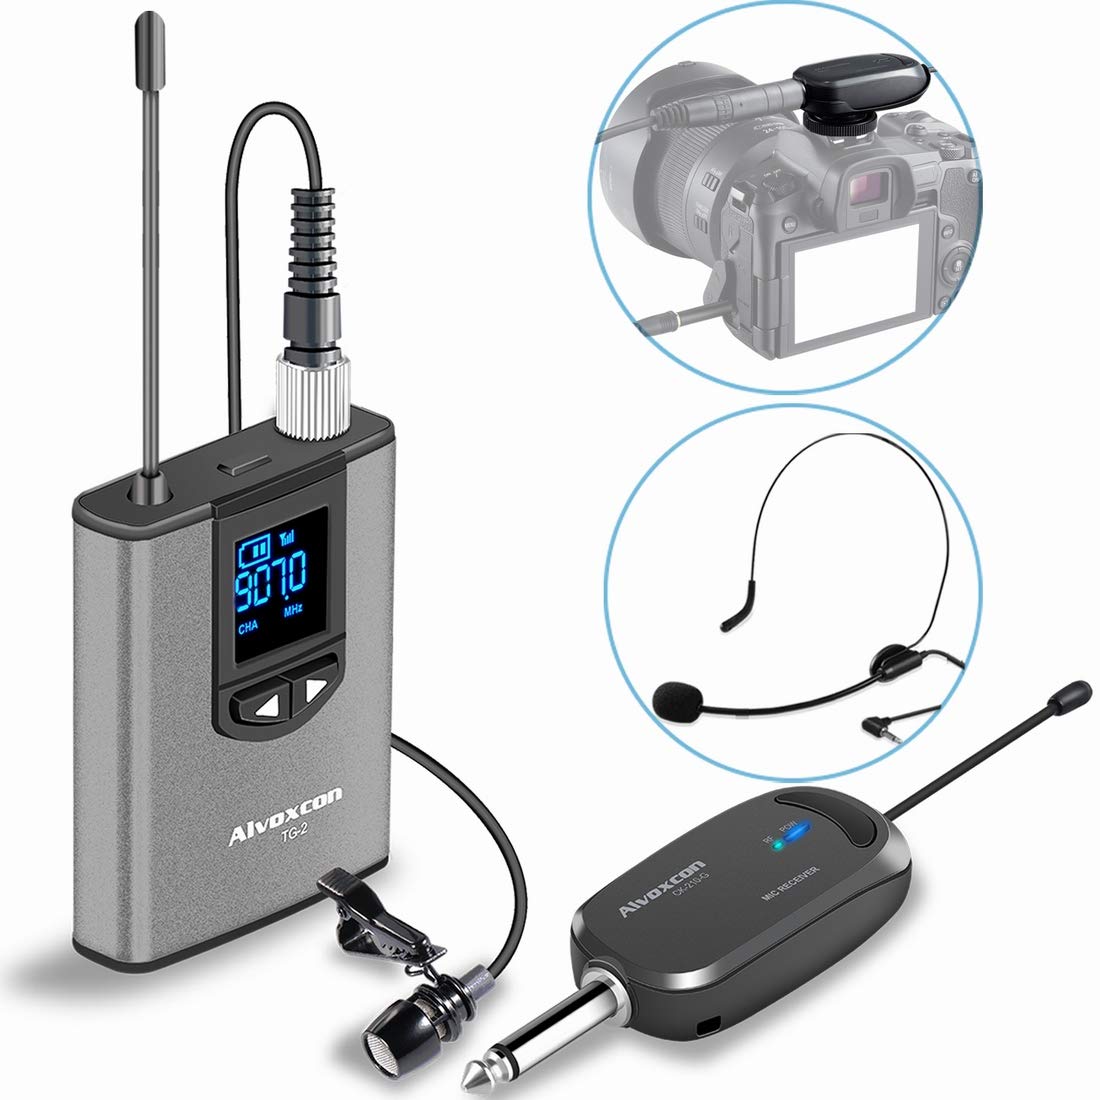 Wireless Headset Lavalier Microphone System for iPhone, DSLR Camera, Youtube